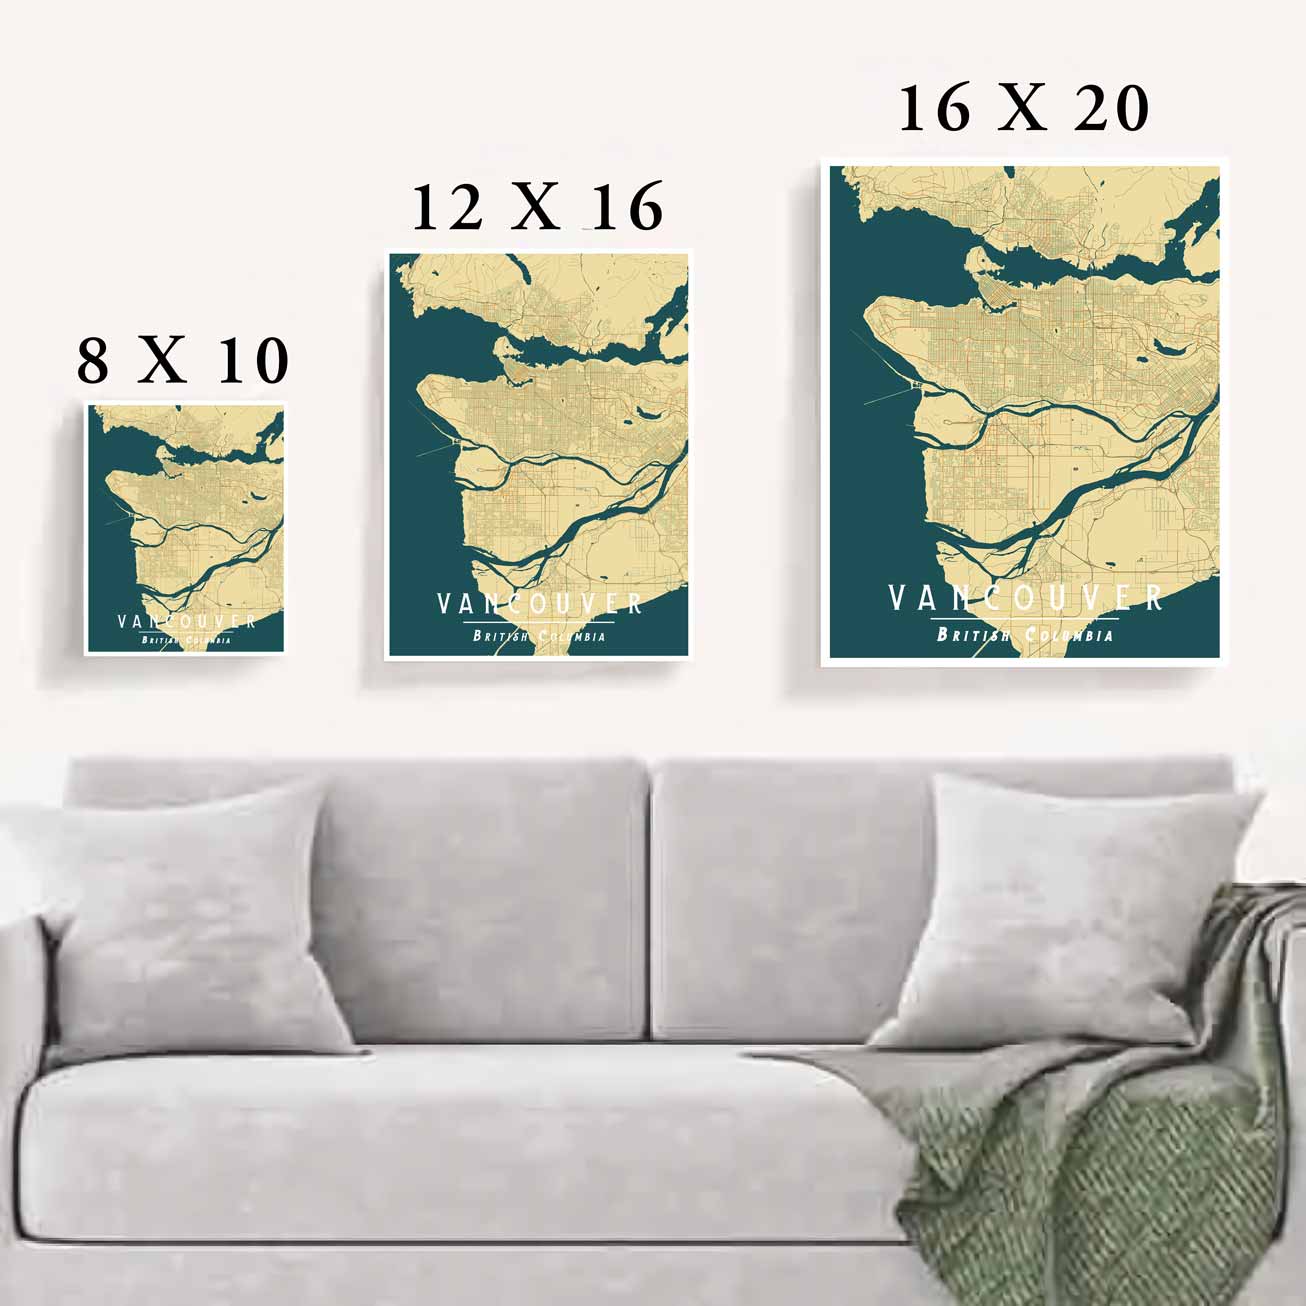 Living Room Vancouver vintage style yellow art print is a map poster featuring all streets and neighborhoods in Greater Vancouver.